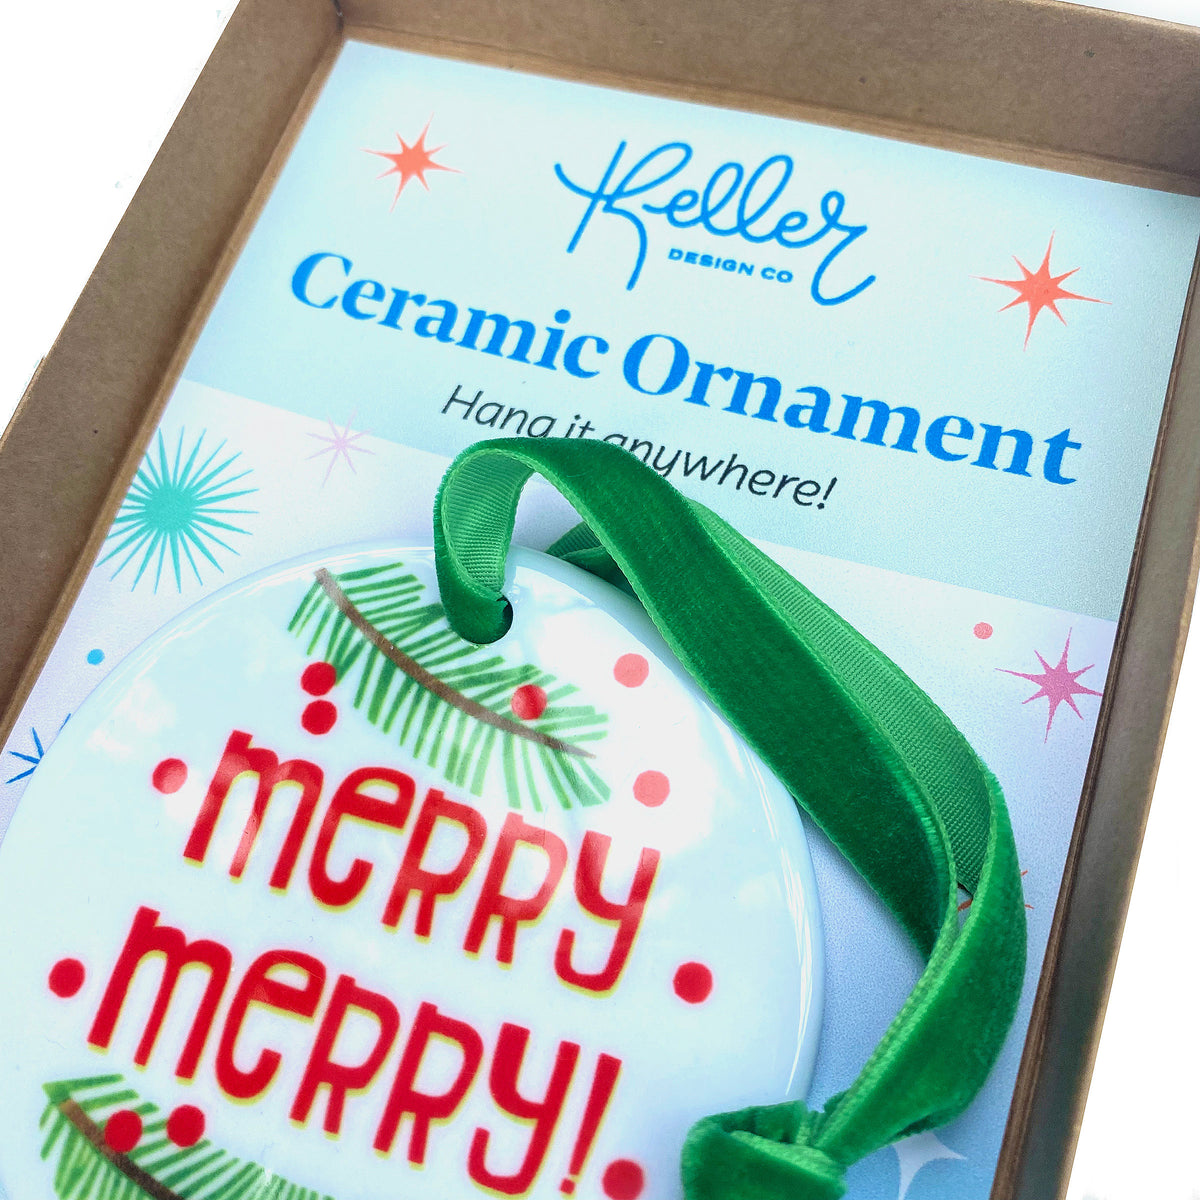 Ceramic Ornament with Merry Merry Print